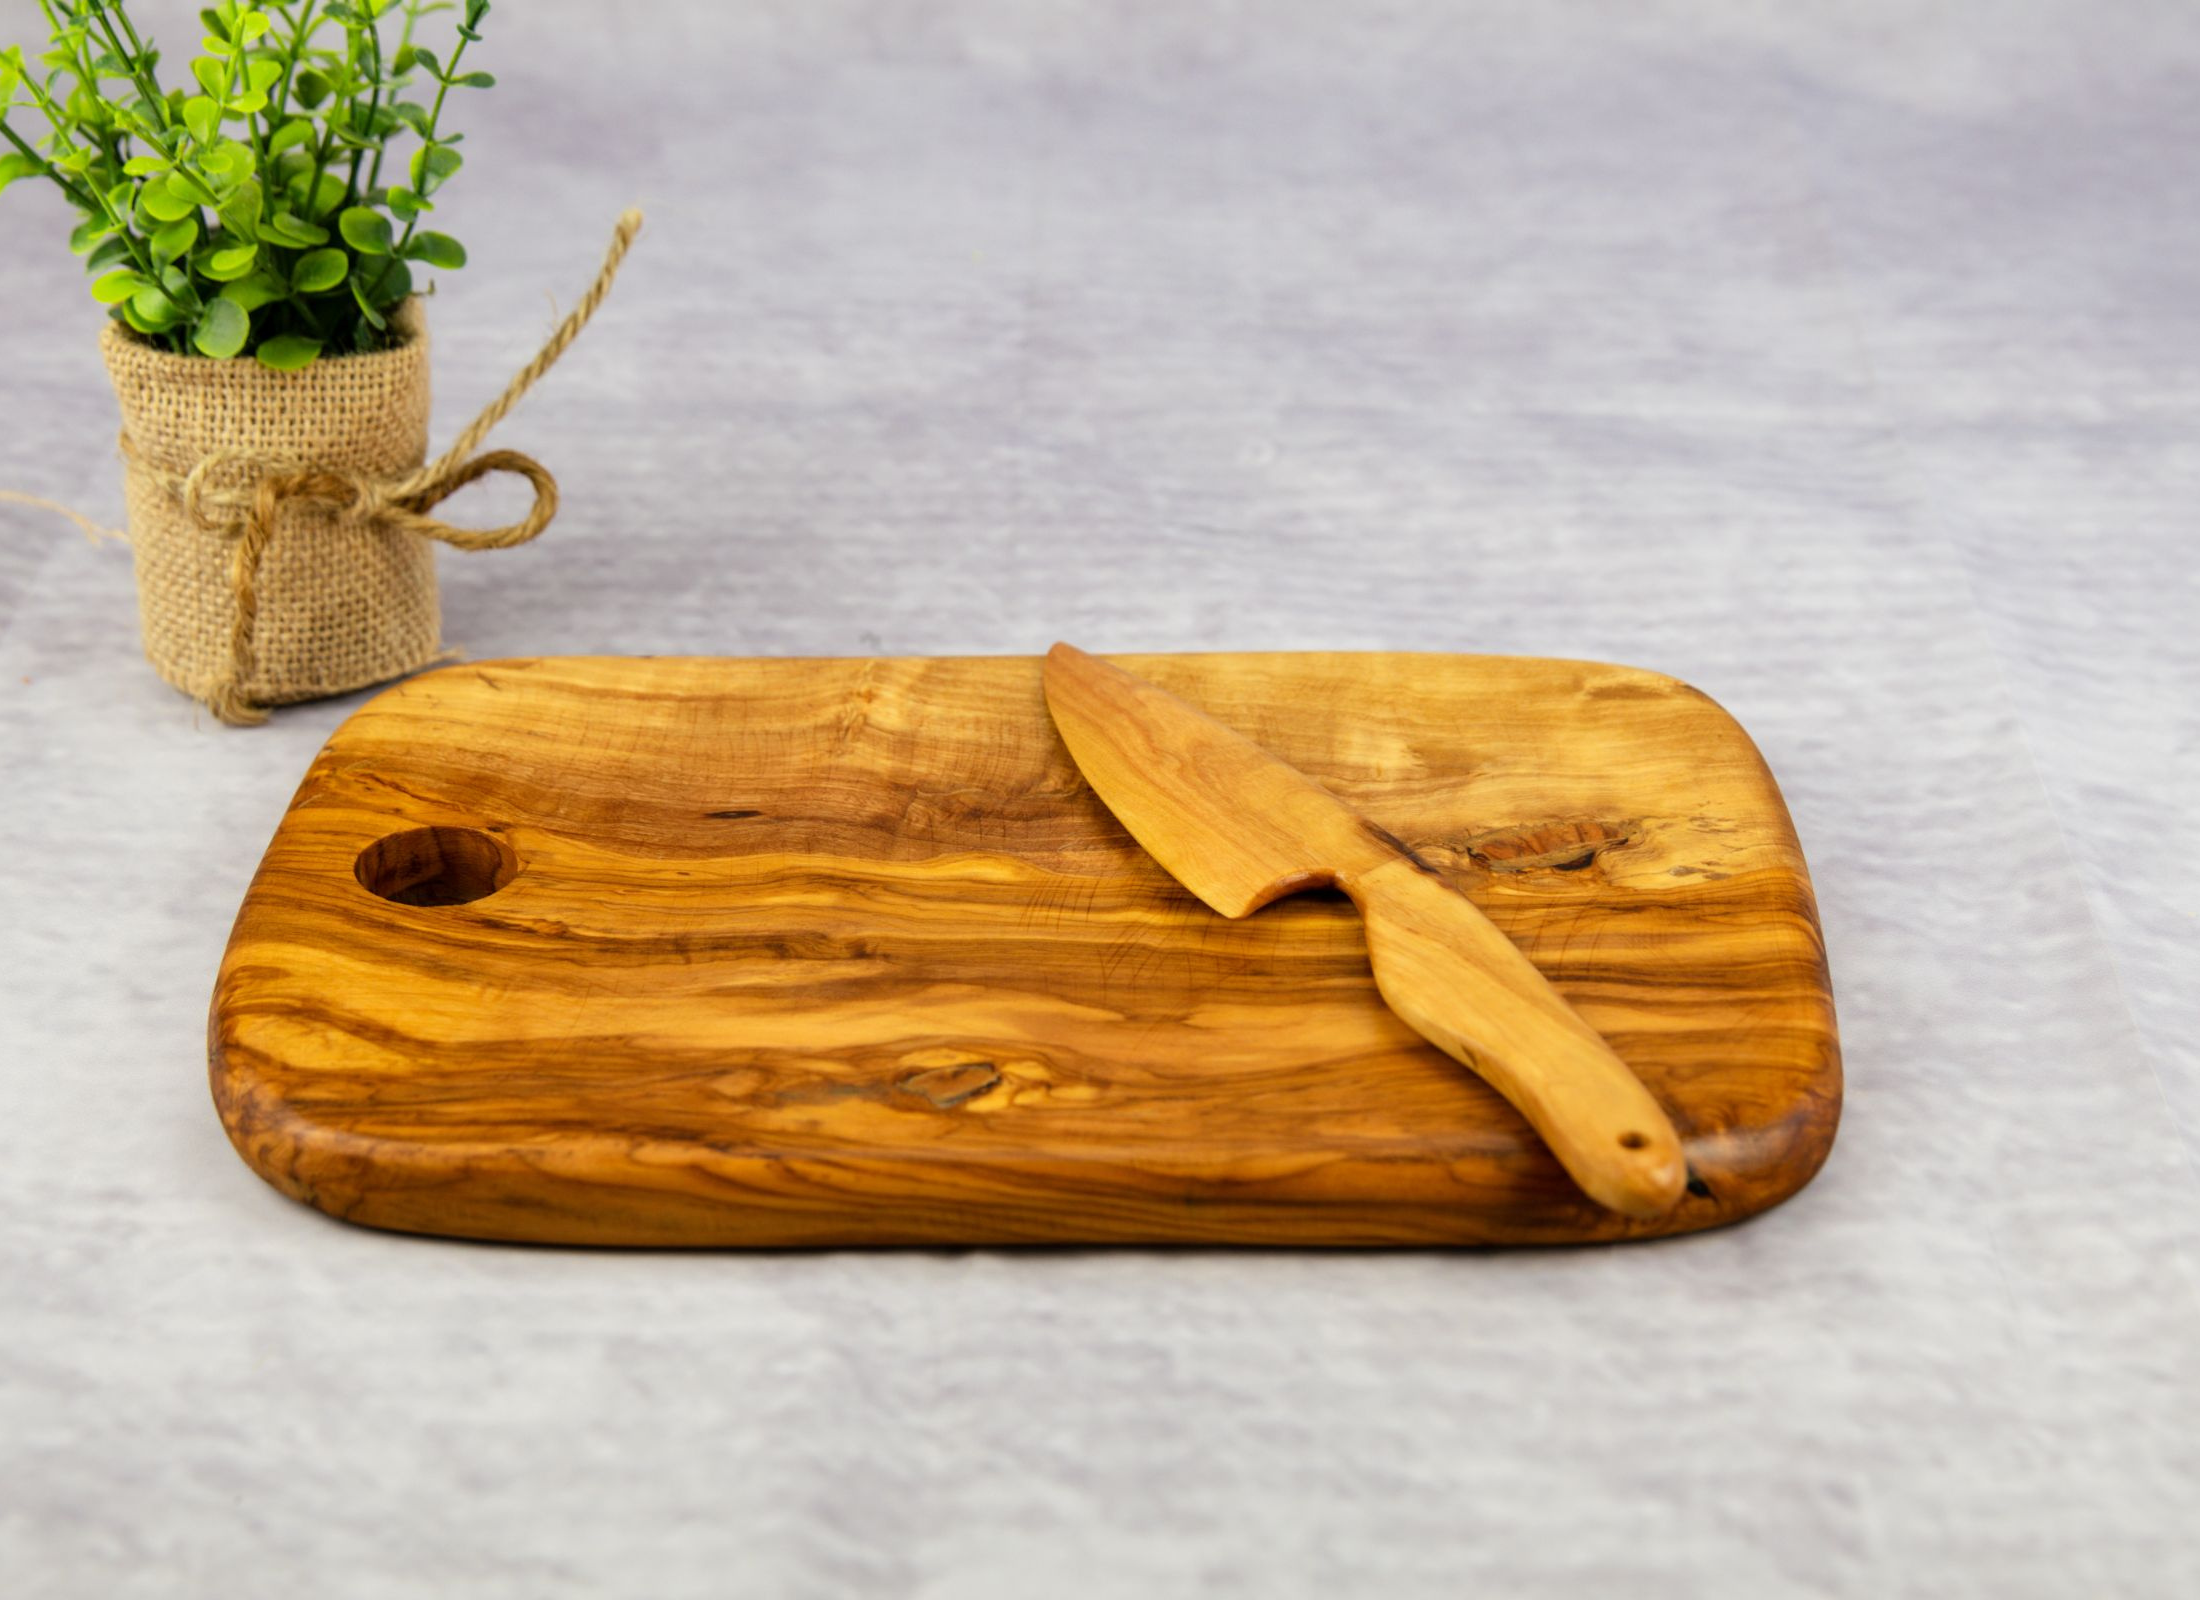 Copy of Thuya Wood Chopping Board Set: Moroccan Handcrafted Elegance with Wooden Knife Ensemble - Your Culinary Upgrade